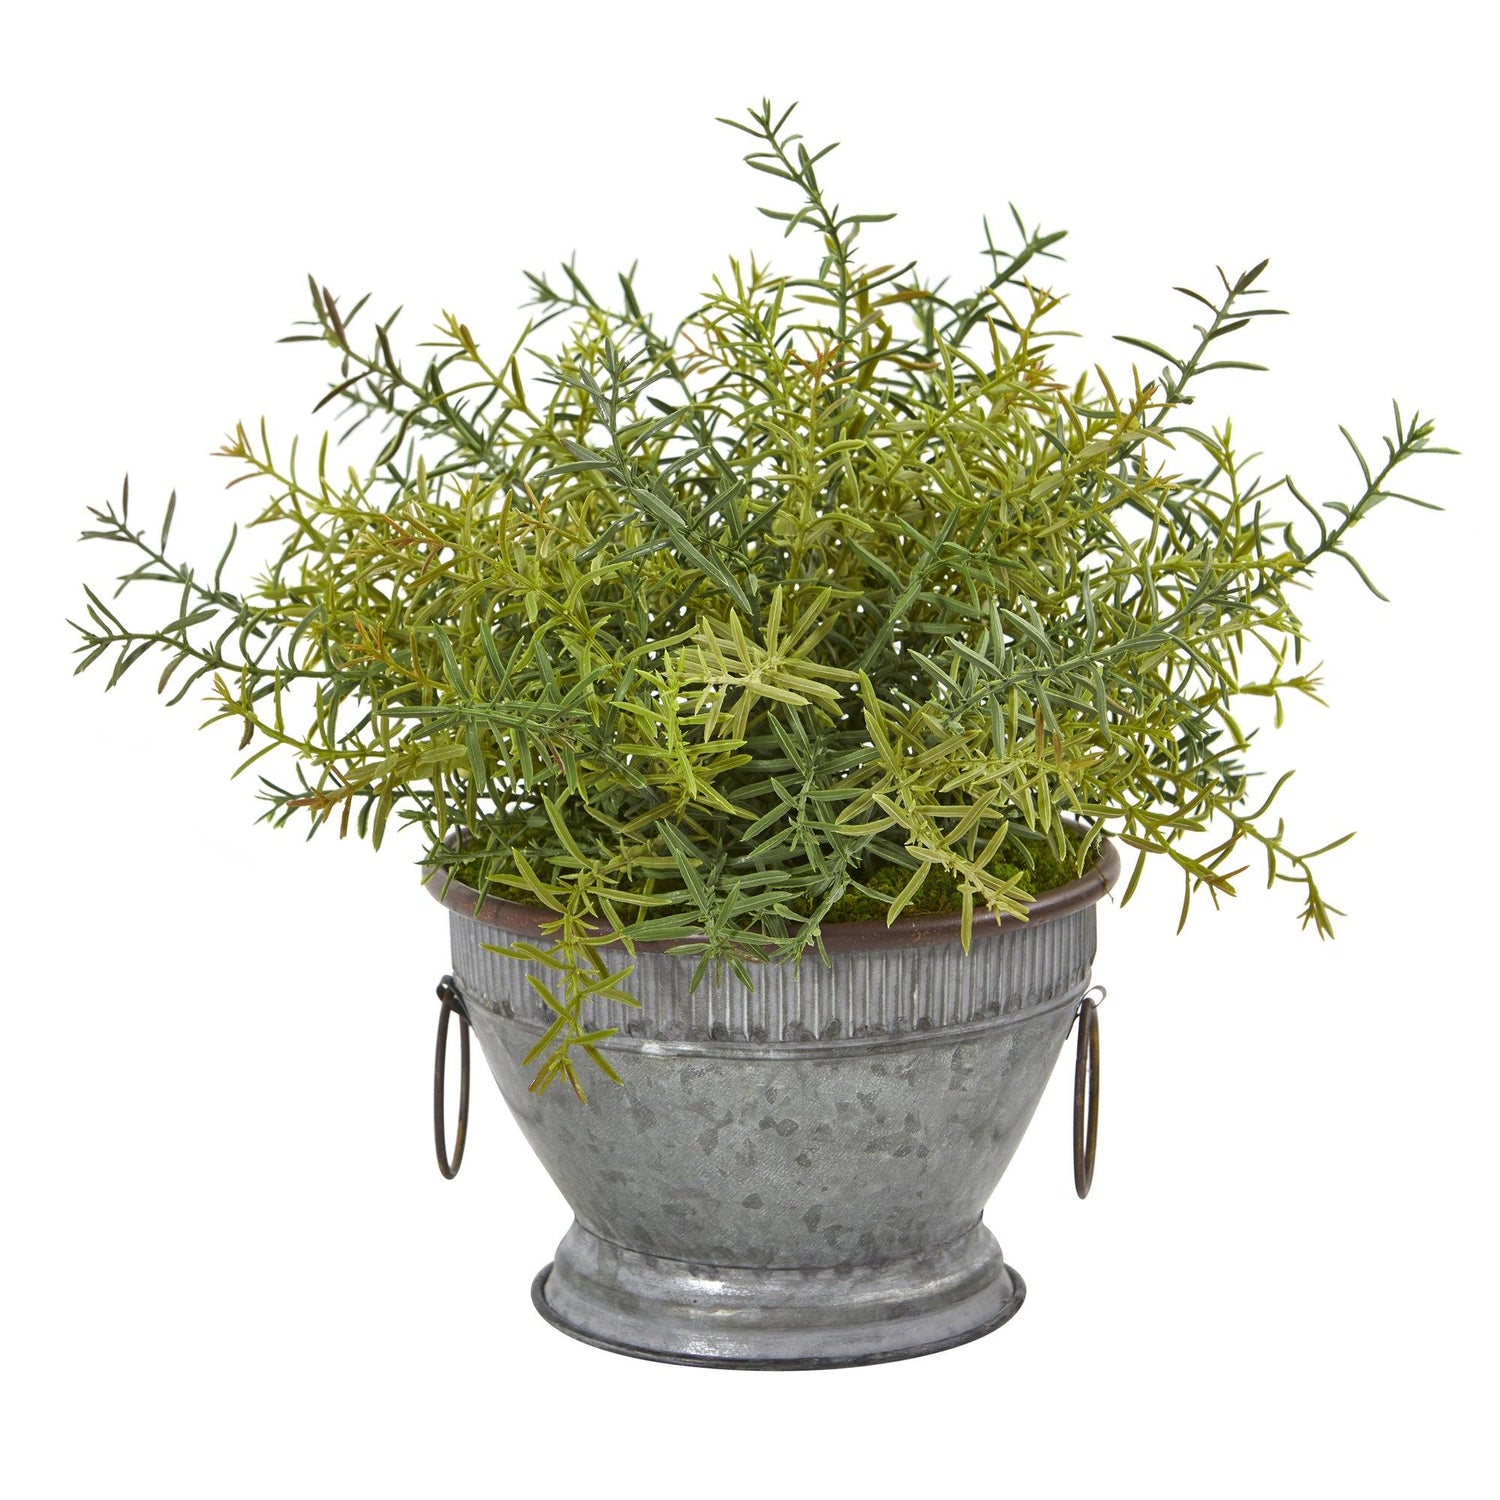 14” Rosemary Artificial Plant in Vintage Metal Bowl with Copper Trimming